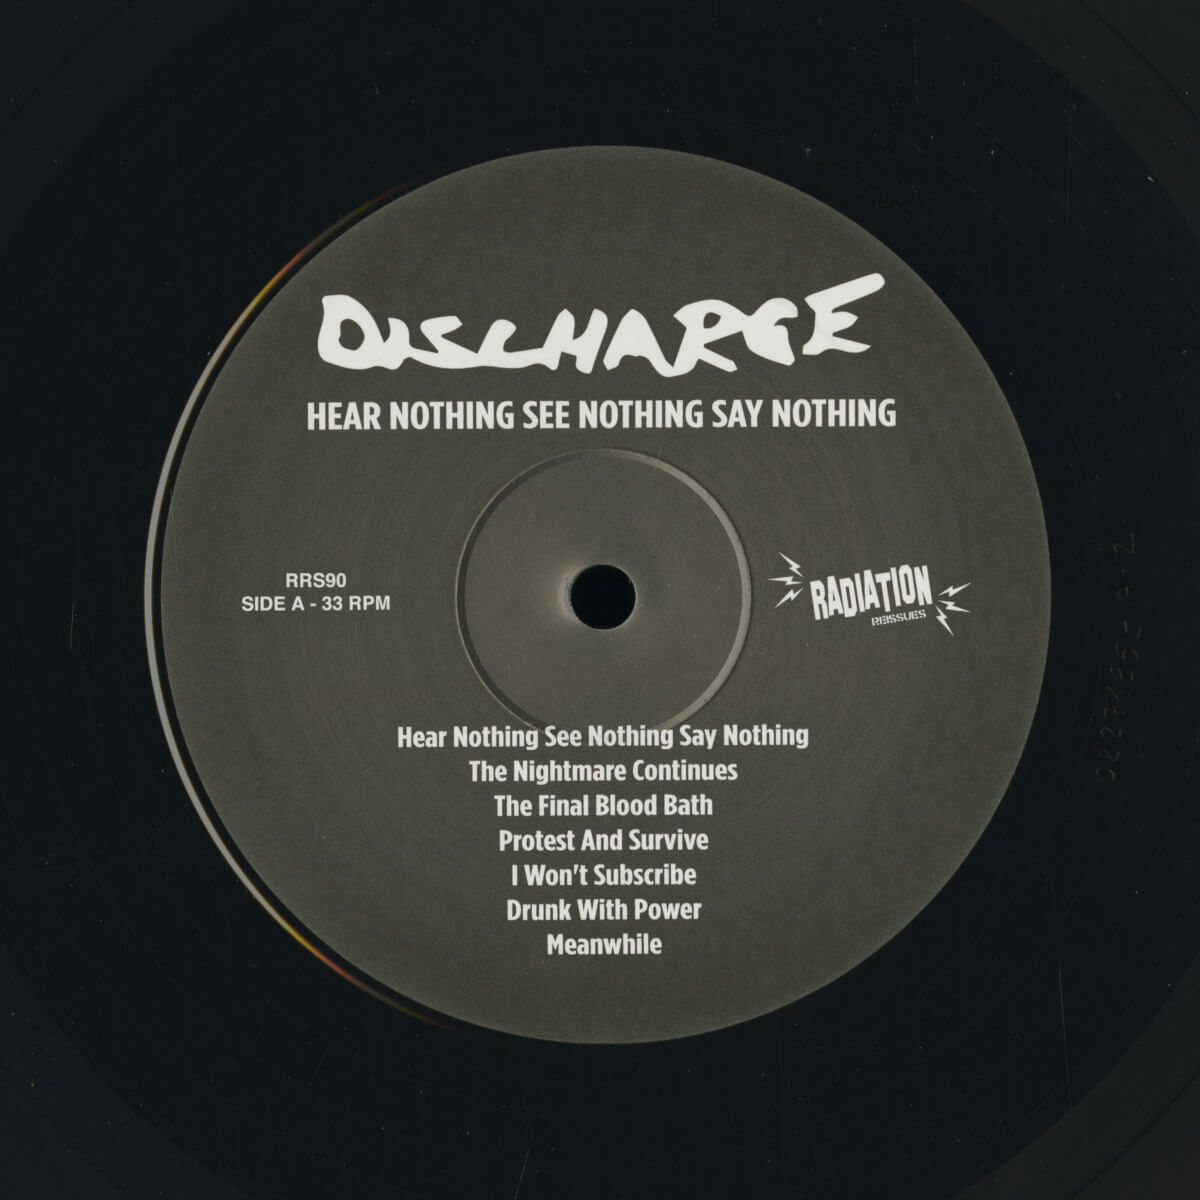 Discharge – Hear Nothing See Nothing Say Nothing (2018 Reissue)